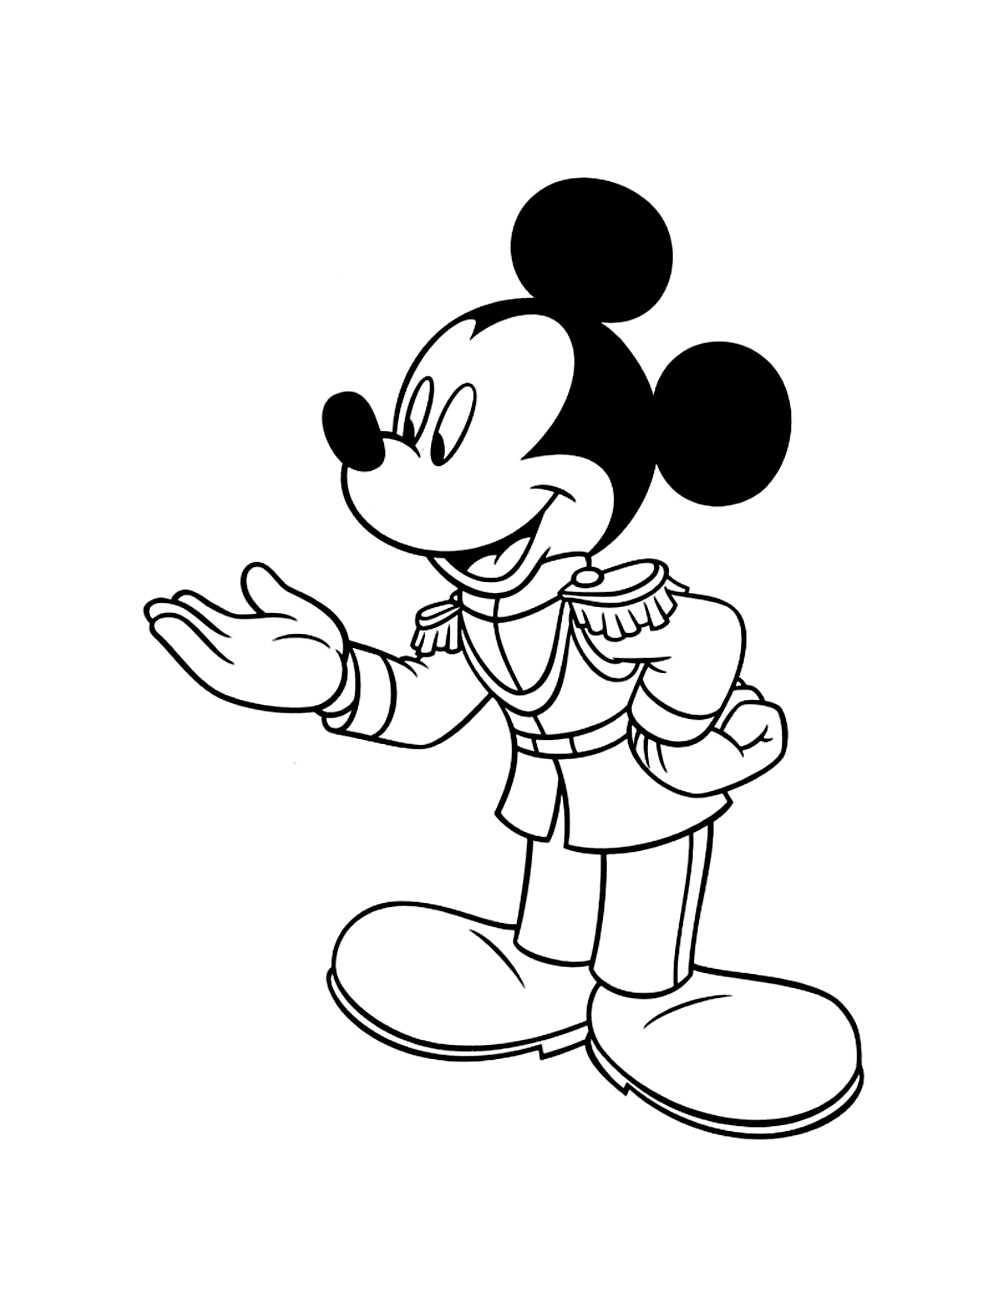 Mickey To Color For Kids - Mickey Kids Coloring Pages concernant Dessin Mikey 